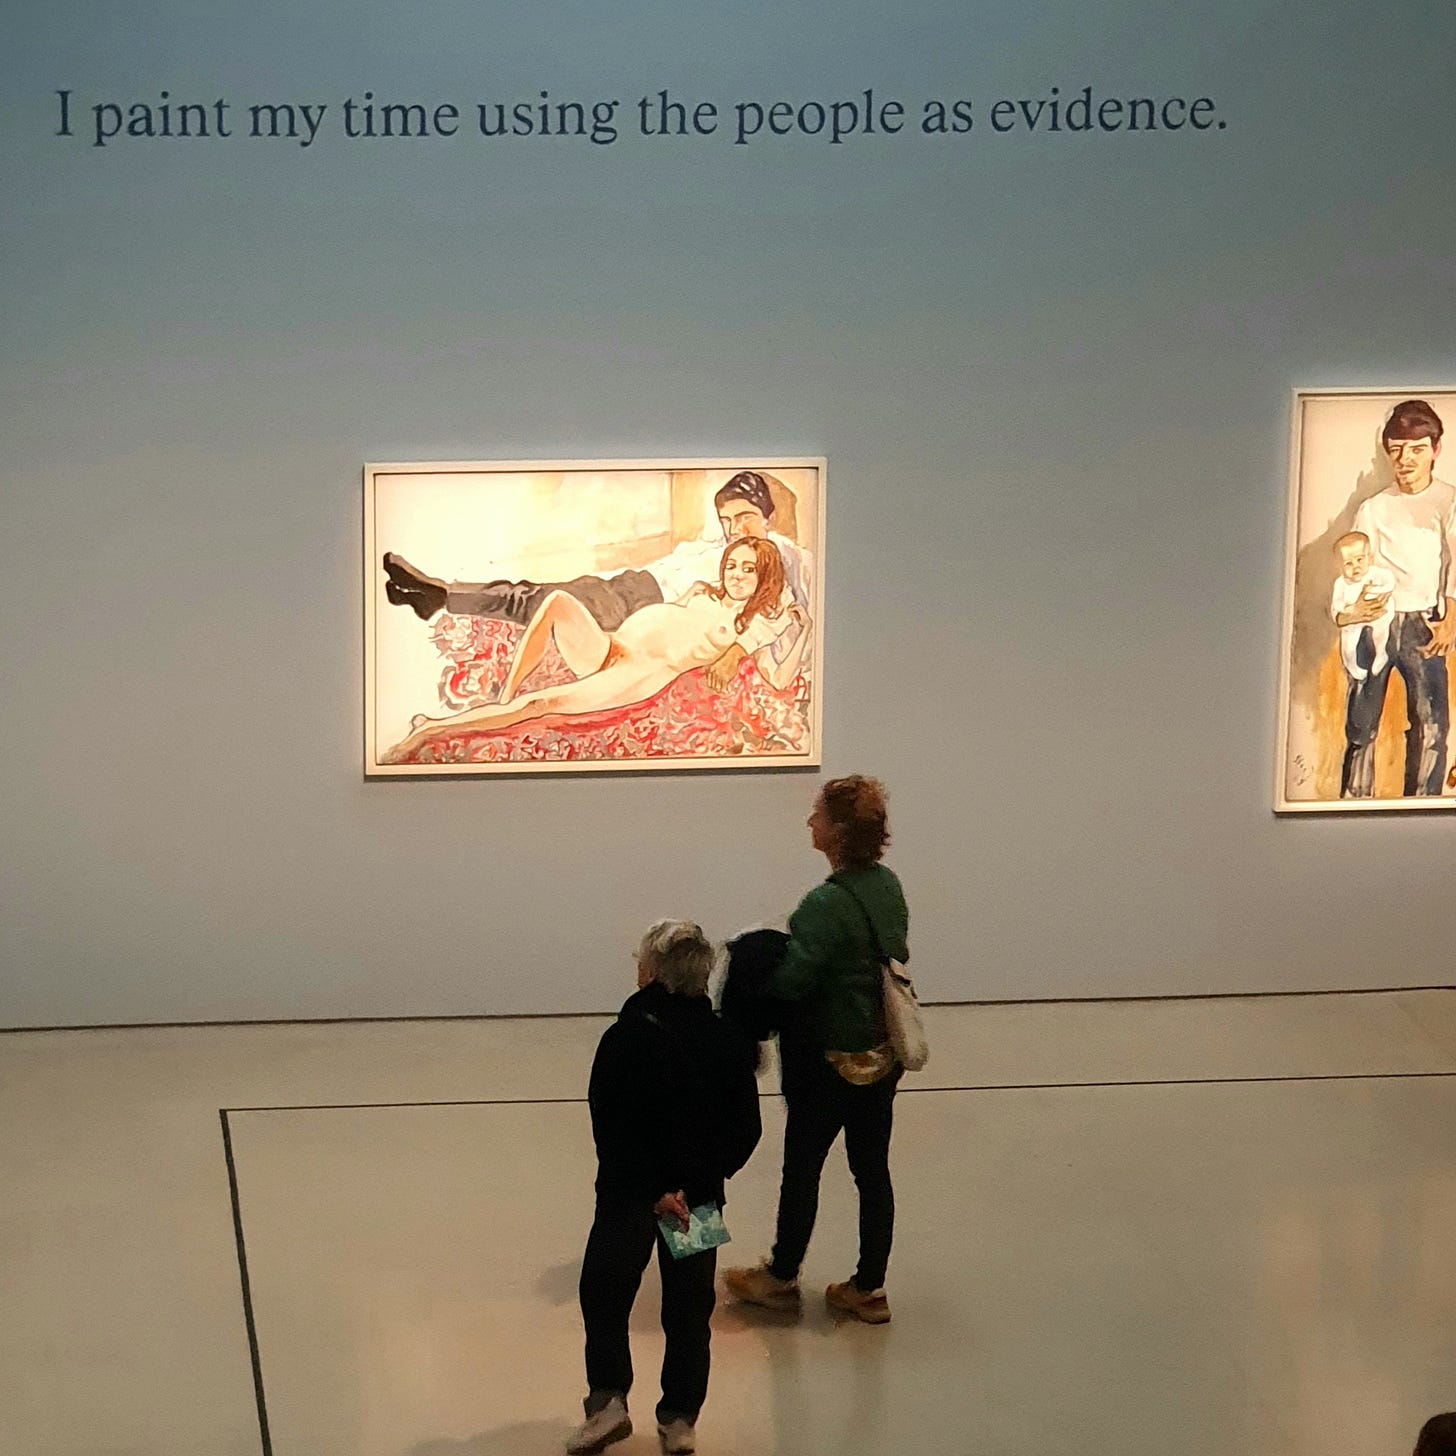 Photo of Alice Neel paintings and 2 onlookers. Caption on the gallery wall reads “I paint my time using the people as evidence”